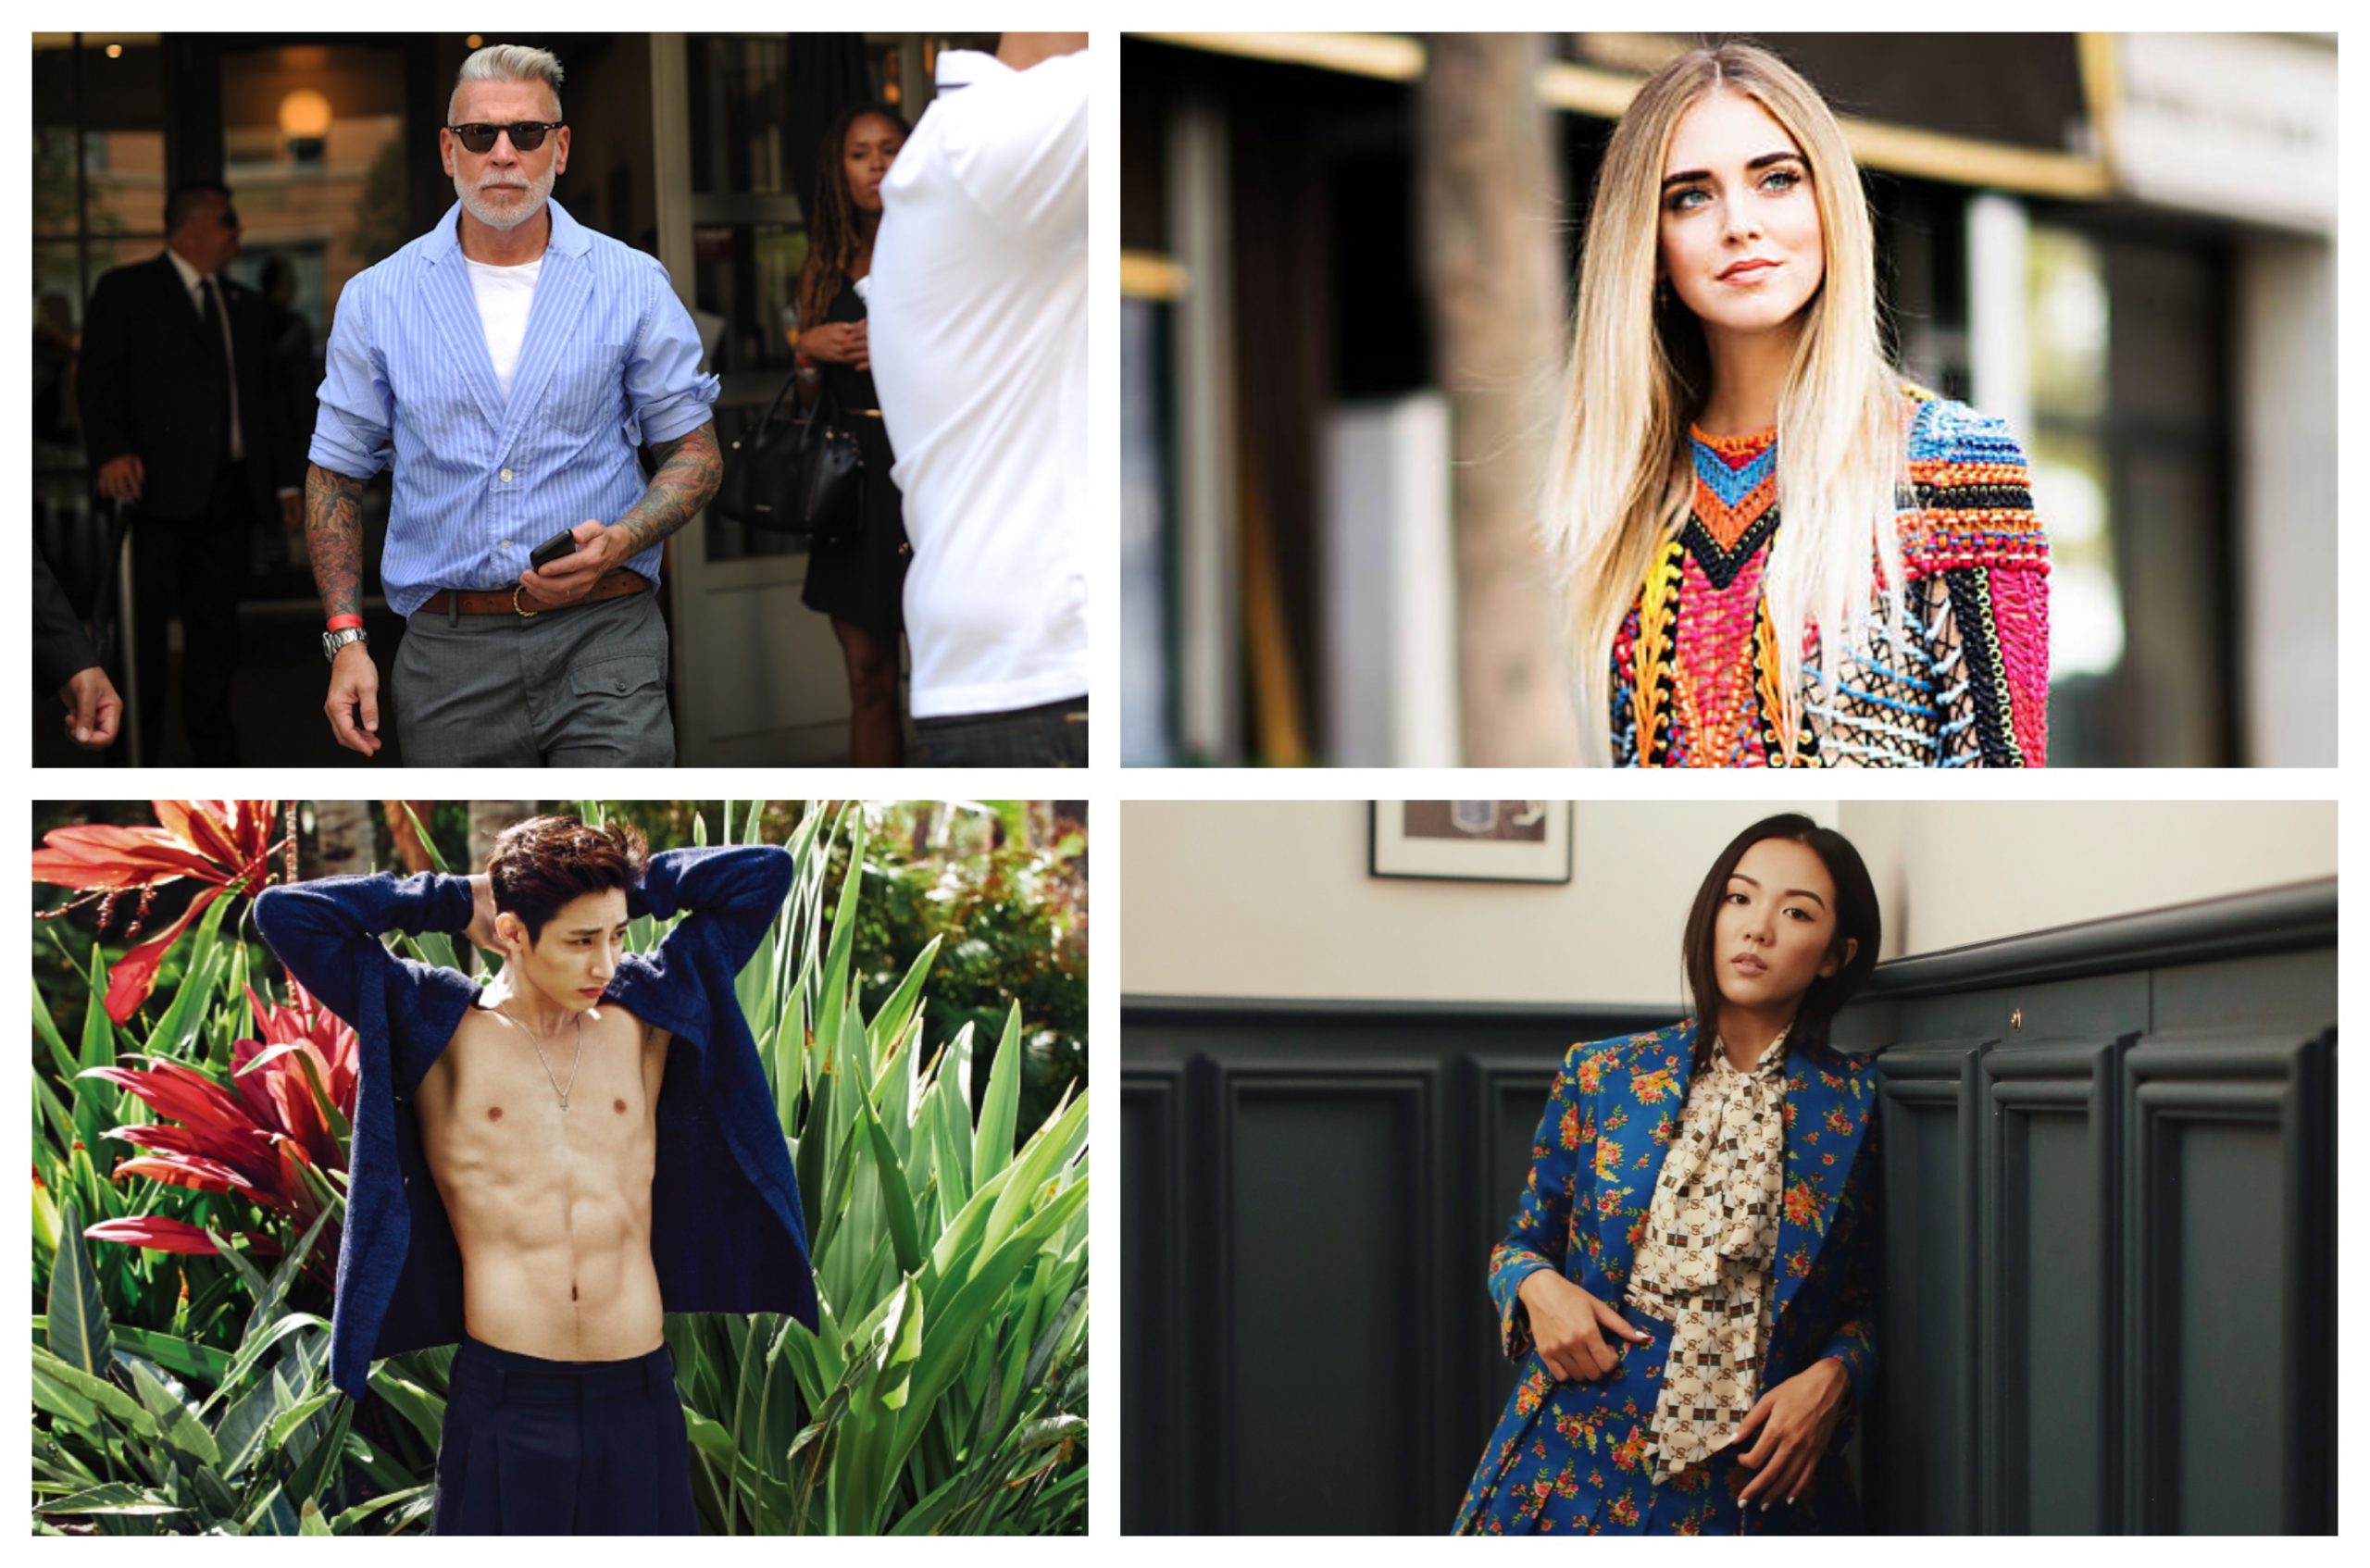 Top 10 fashionista and fashionisto icons in the world today